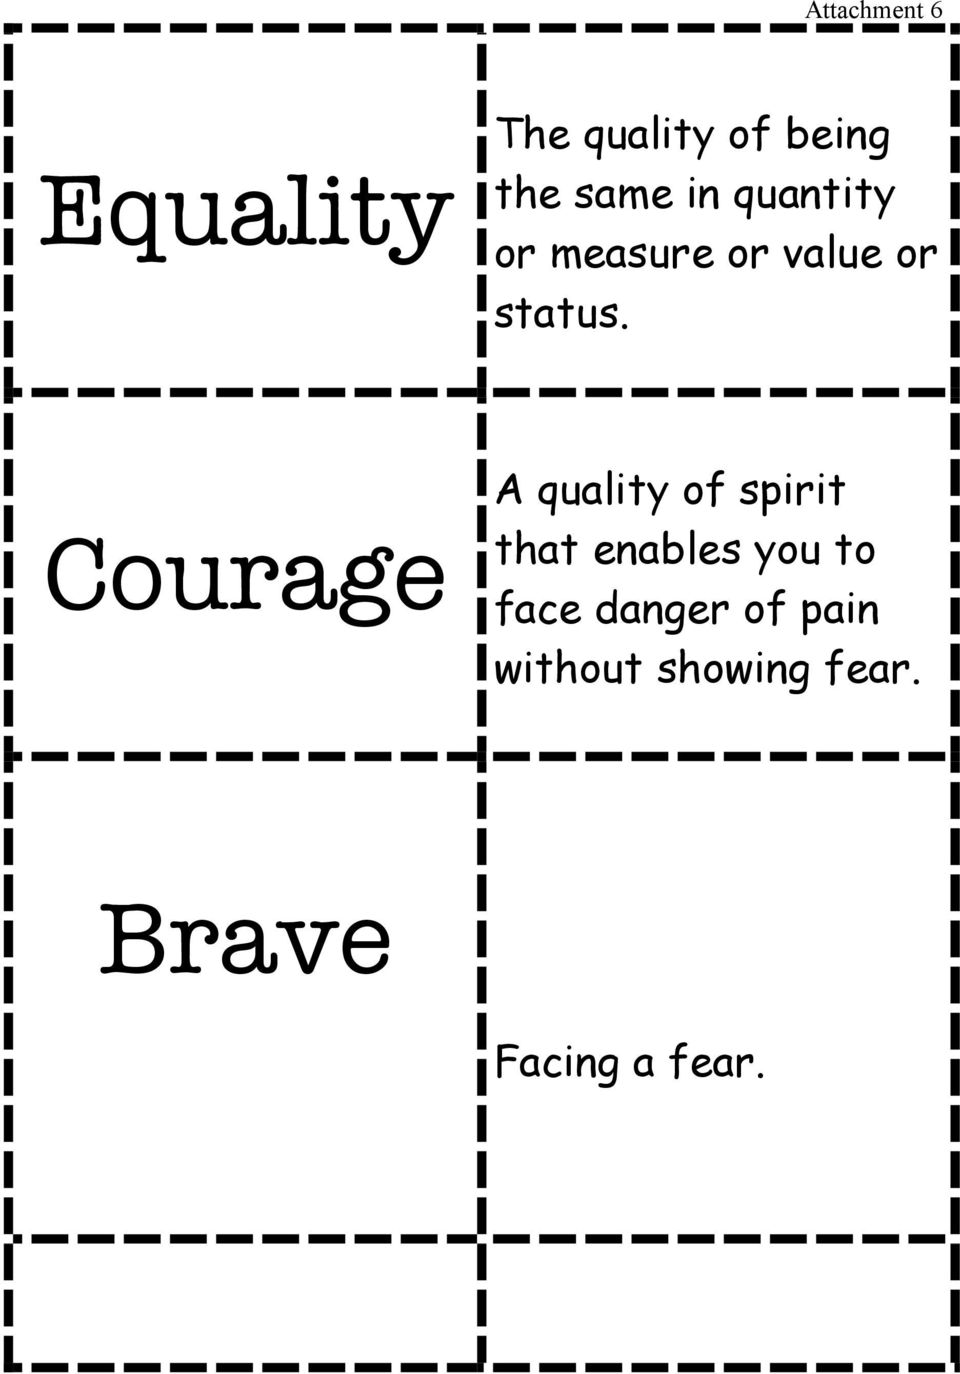 Courage A quality of spirit that enables you to